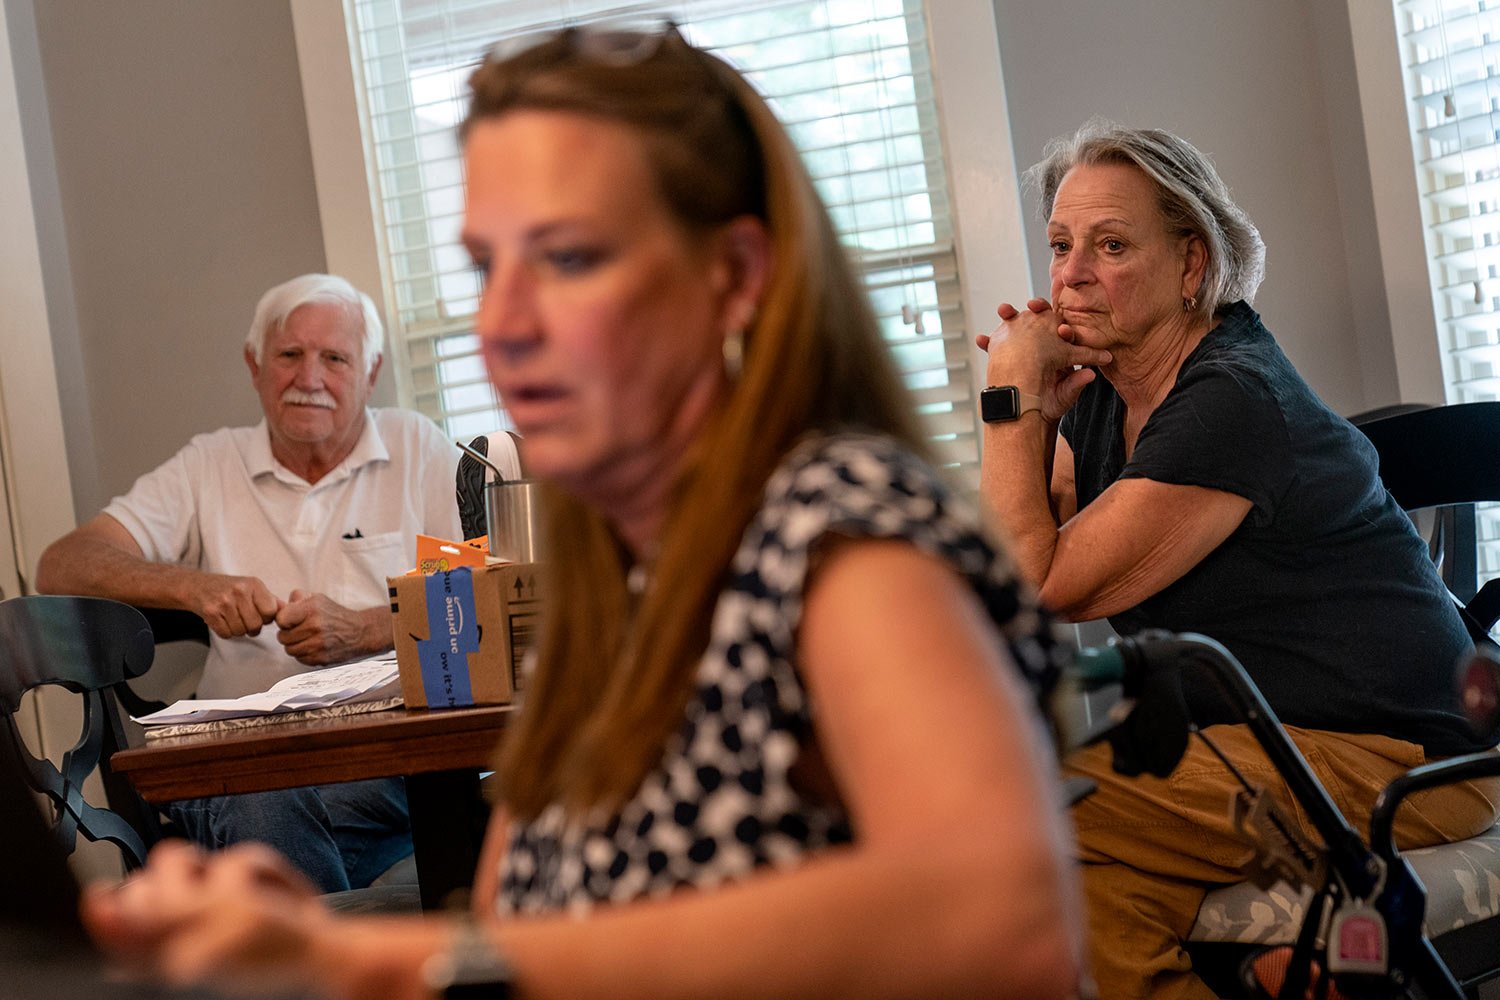  Ralph, left, and Deb Paulsen, the father and mother of Janet Paulsen, center, look on as she sits in her kitchen in Acworth, Ga., Monday, Aug. 7, 2023. (AP Photo/David Goldman)  